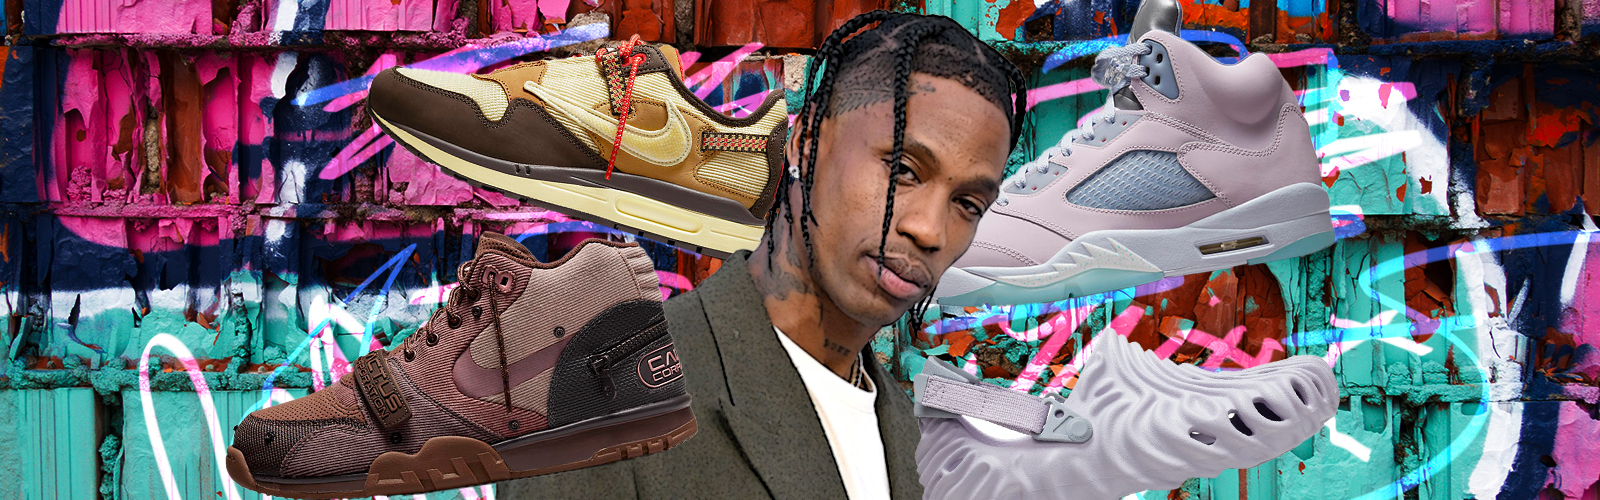 Travis Scott x Air Jordan 1 Reimagined with Removable Swooshes